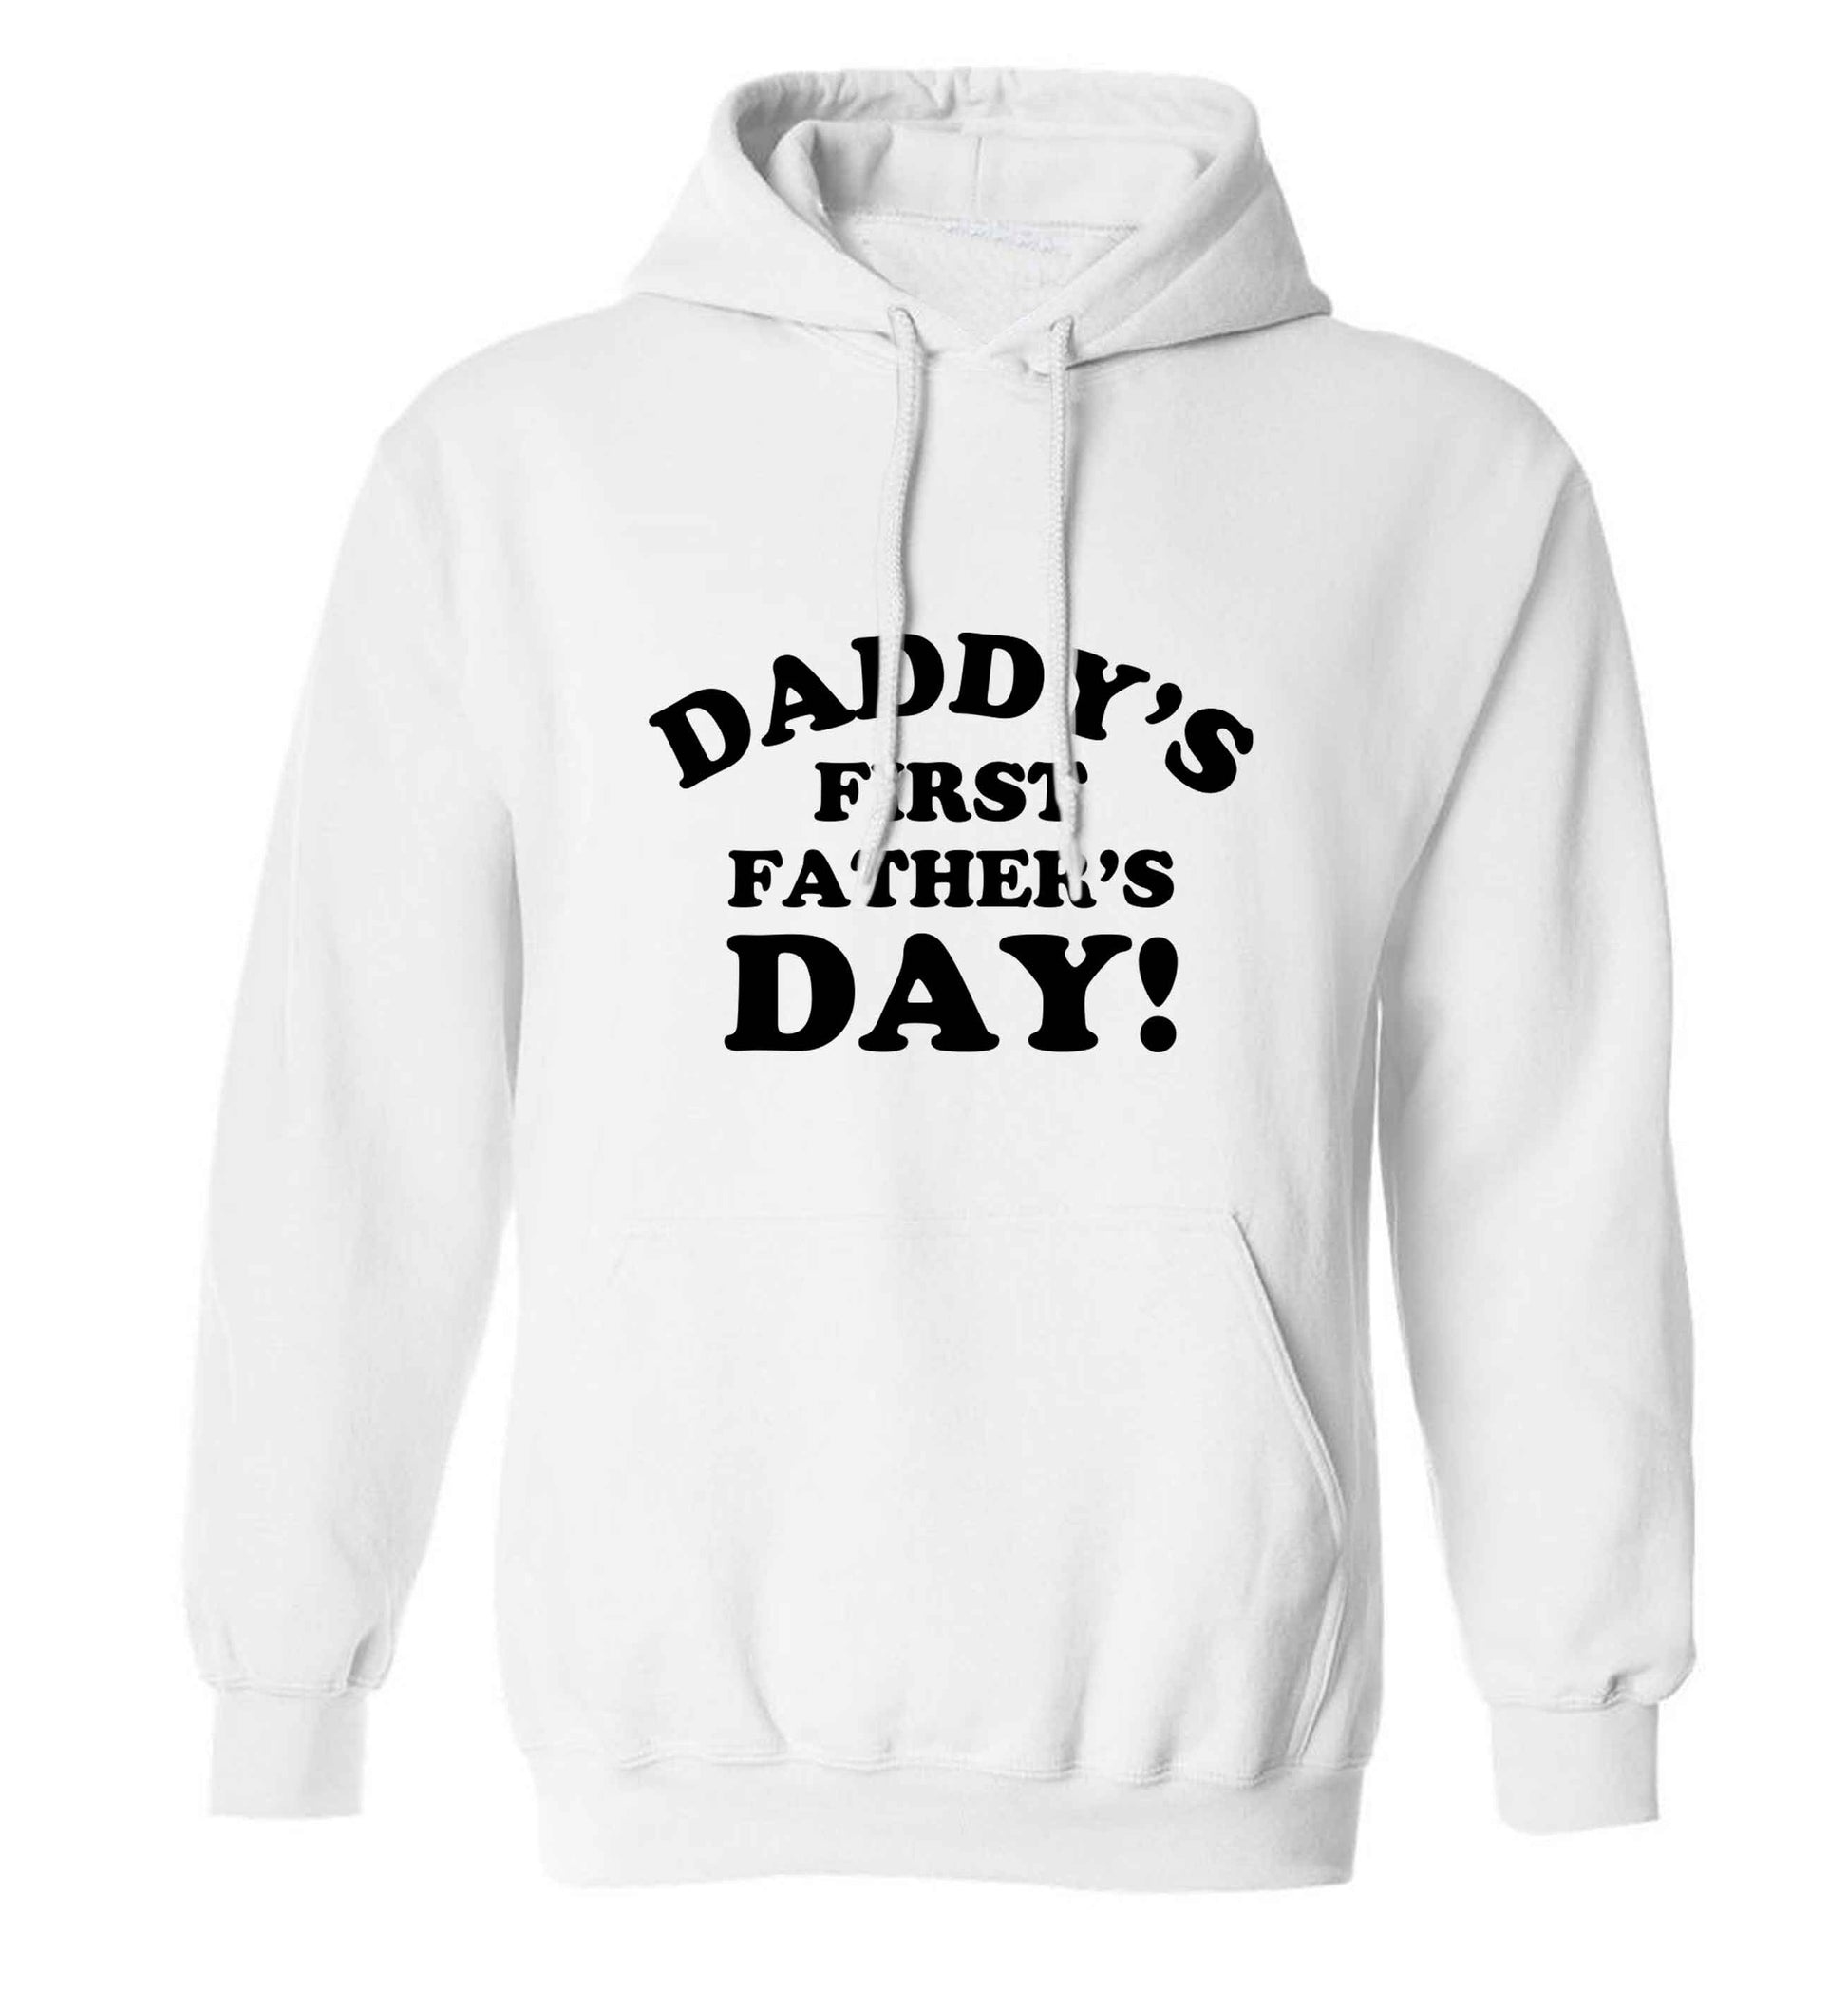 Daddy's first father's day adults unisex white hoodie 2XL